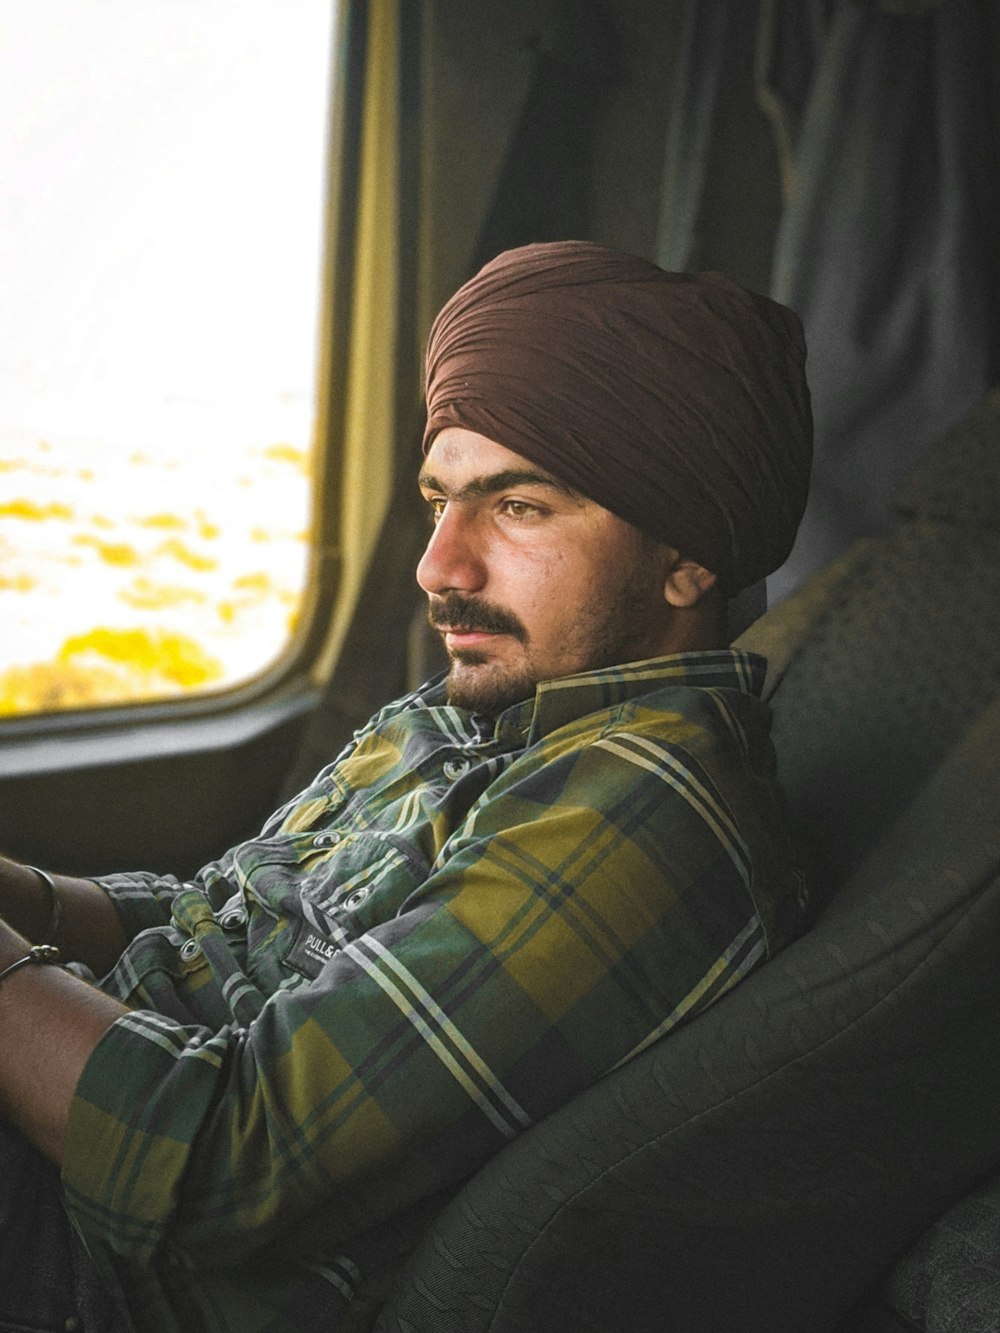 a man in a turban sitting on a plane looking out the window